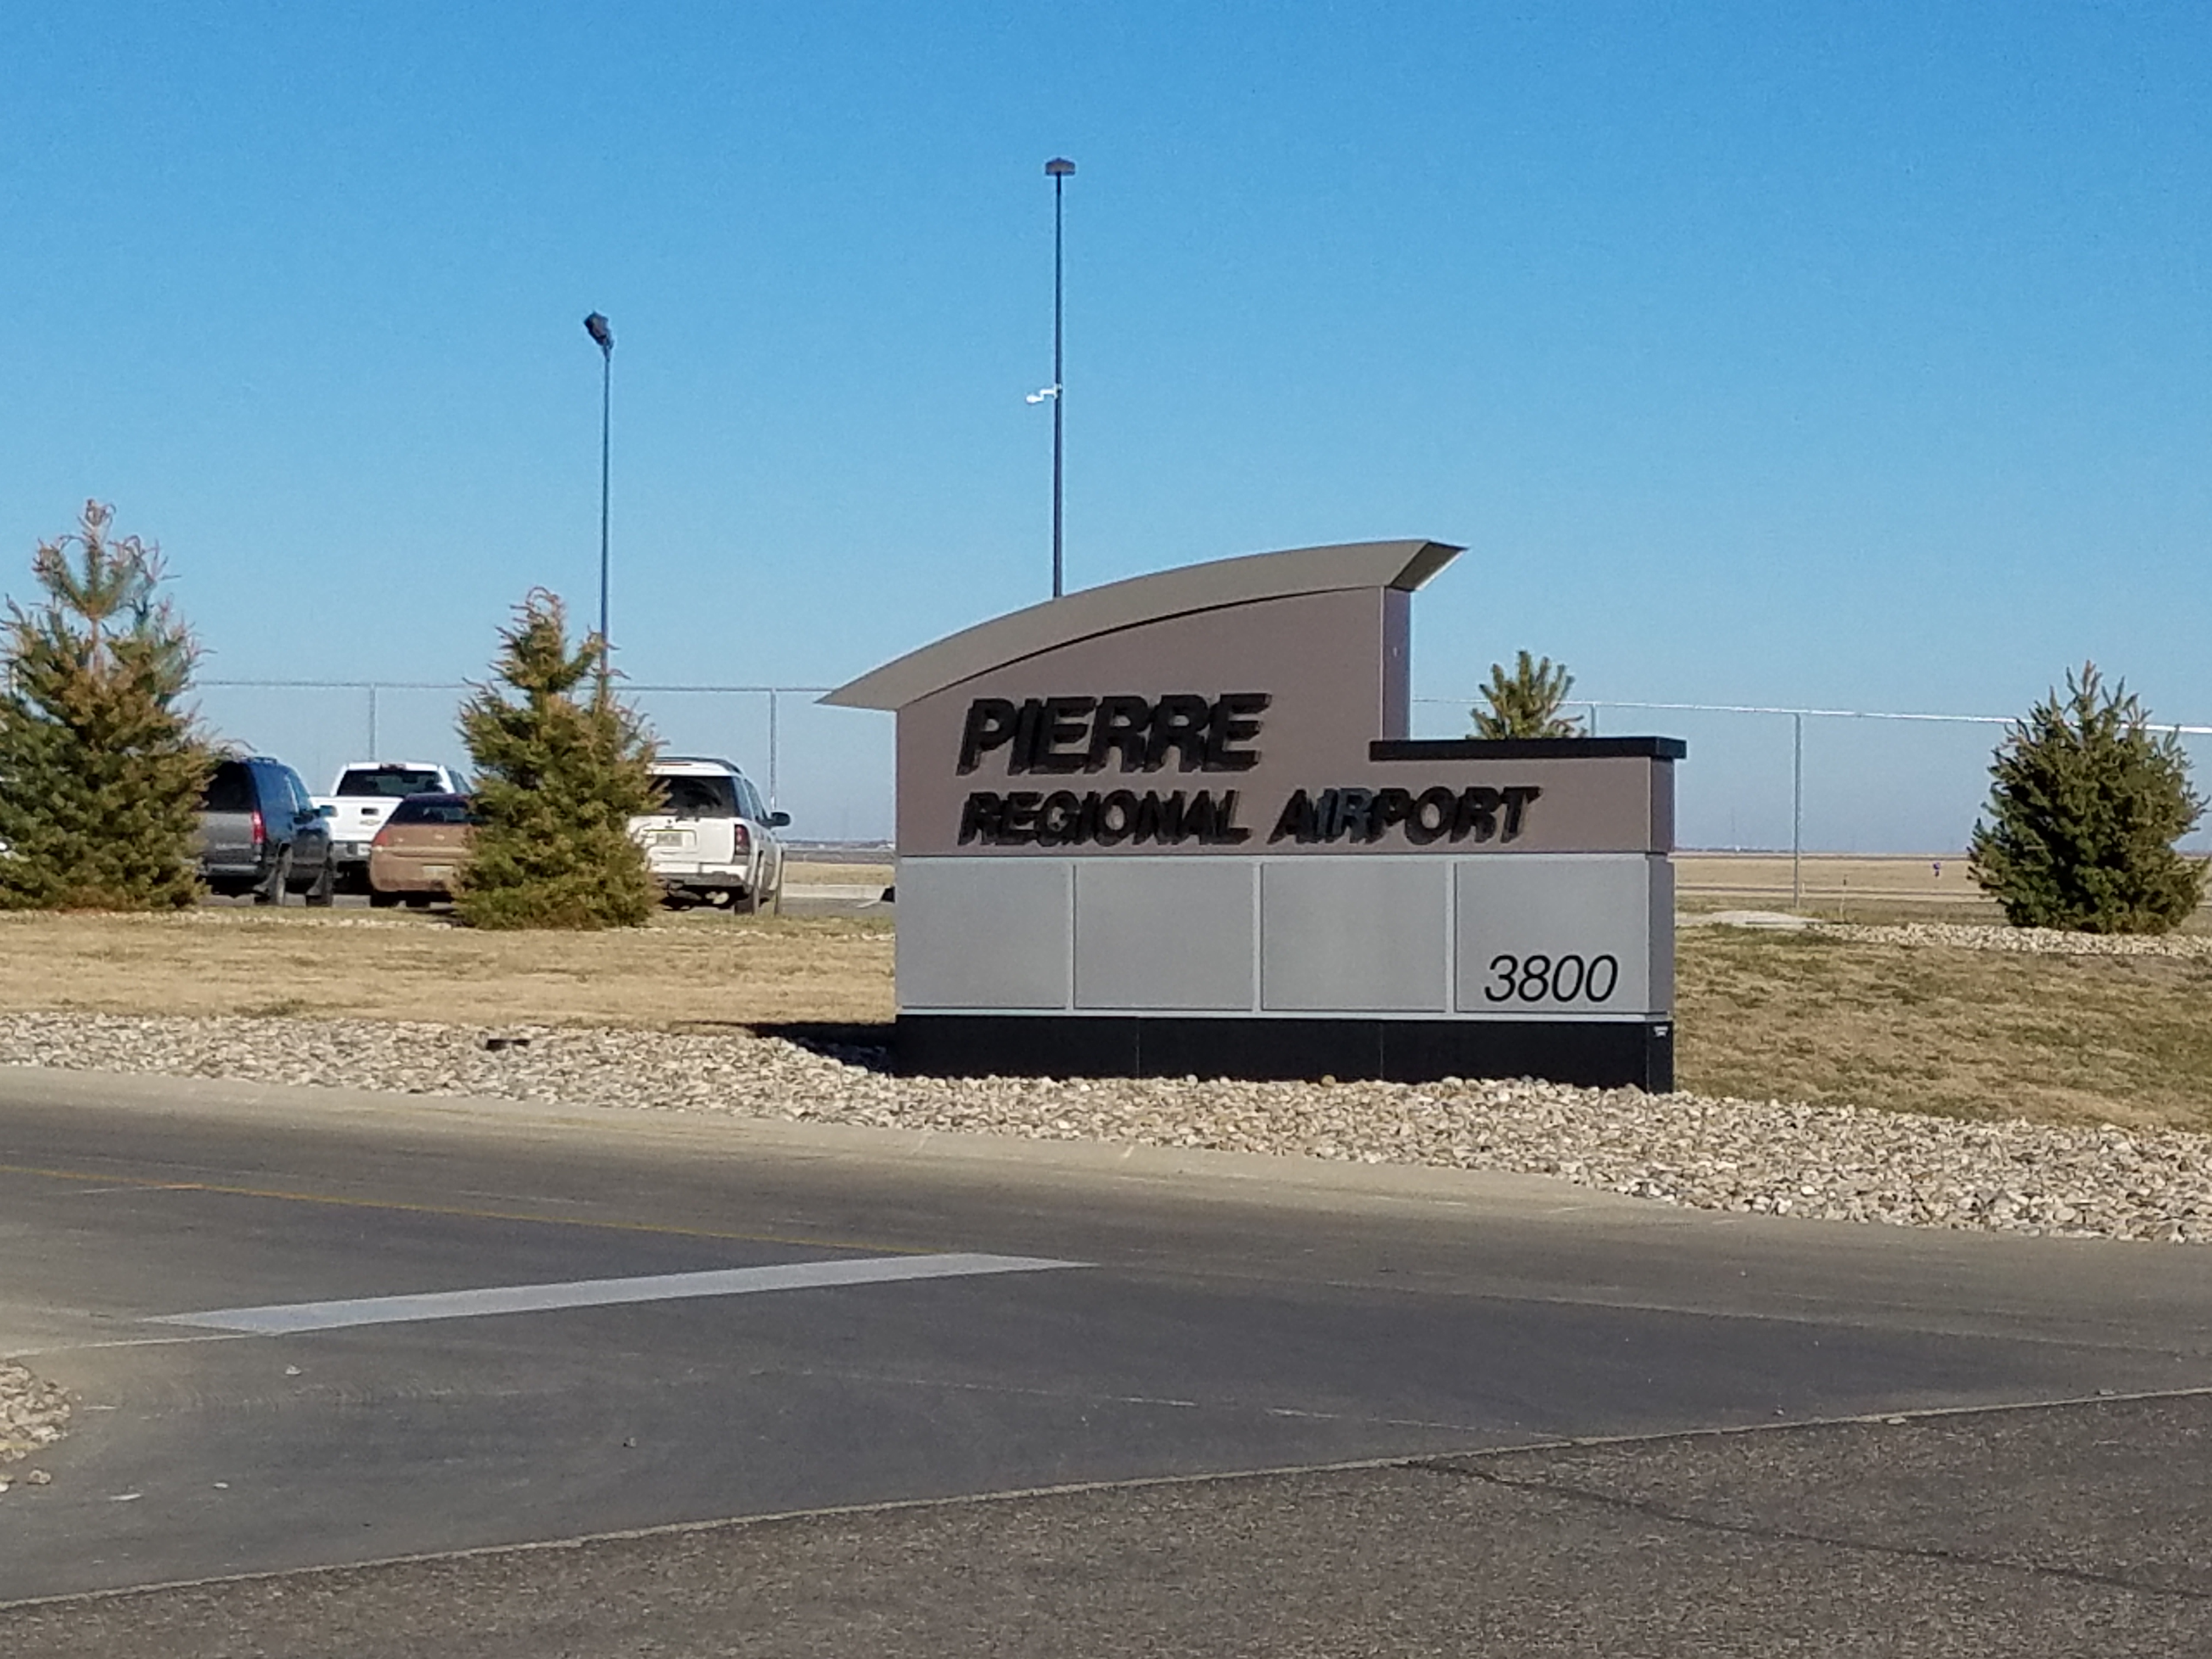 Pierre City Commission Approves Going To Bid On Runway Reconstruction Project